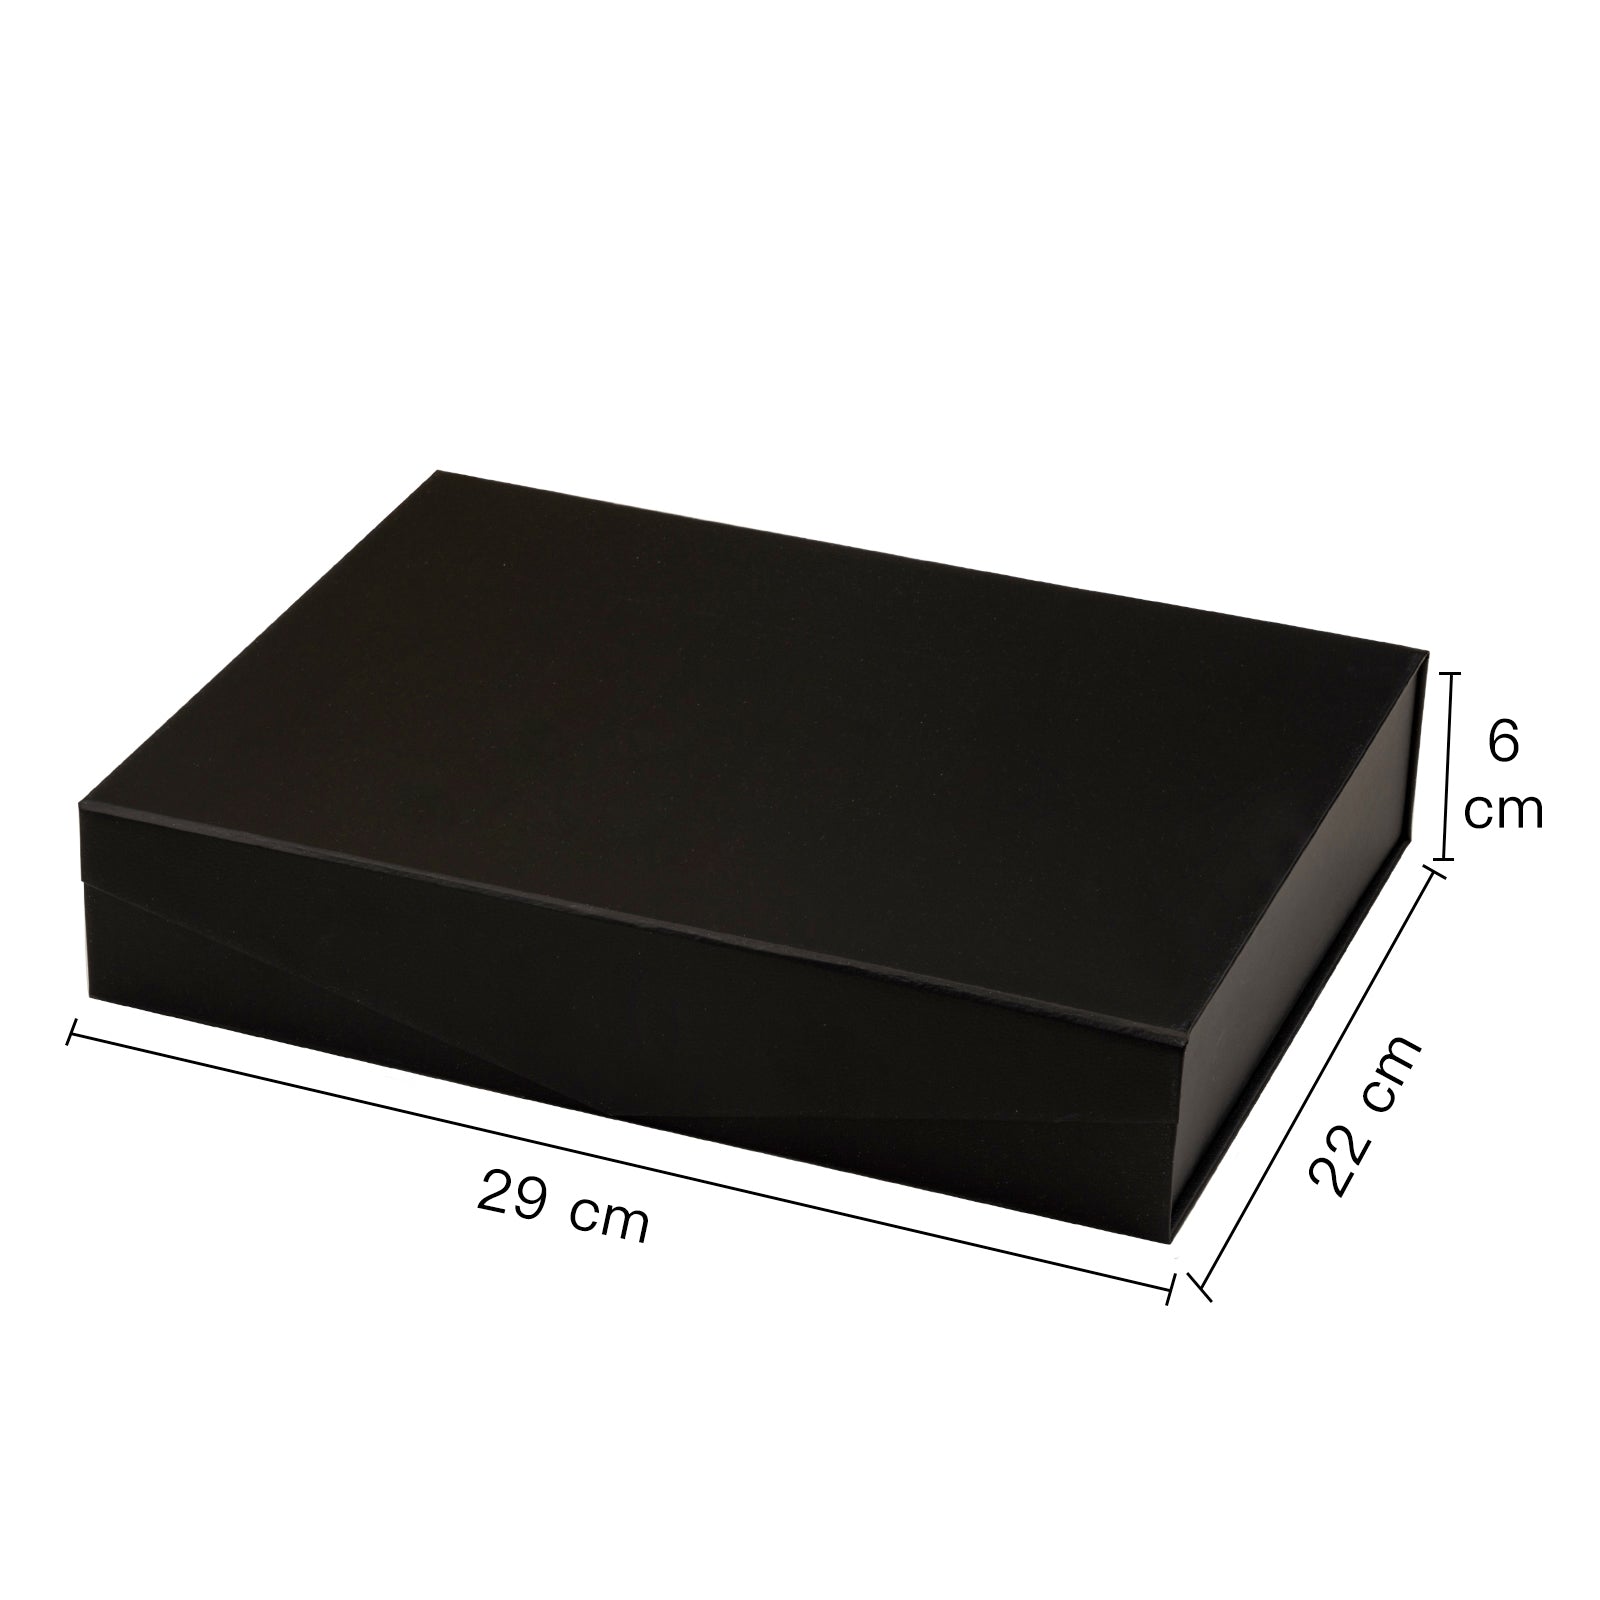 11.4x8.7x2.4 inch Collapsible Gift Box with Magnetic Closure